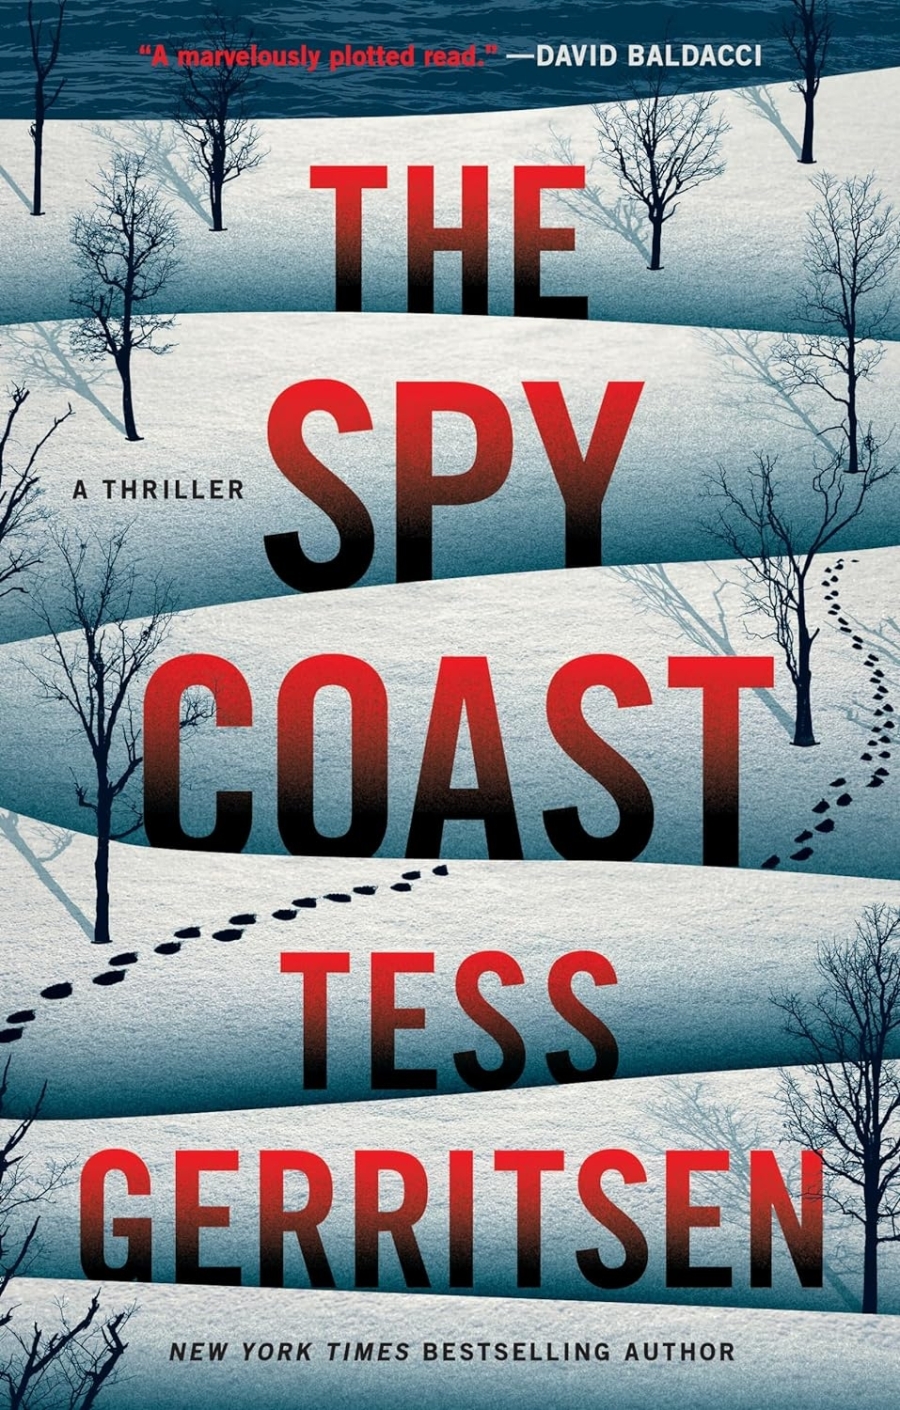 The Spy Coast: A Thriller by New York Times bestselling author Tess Gerritsen